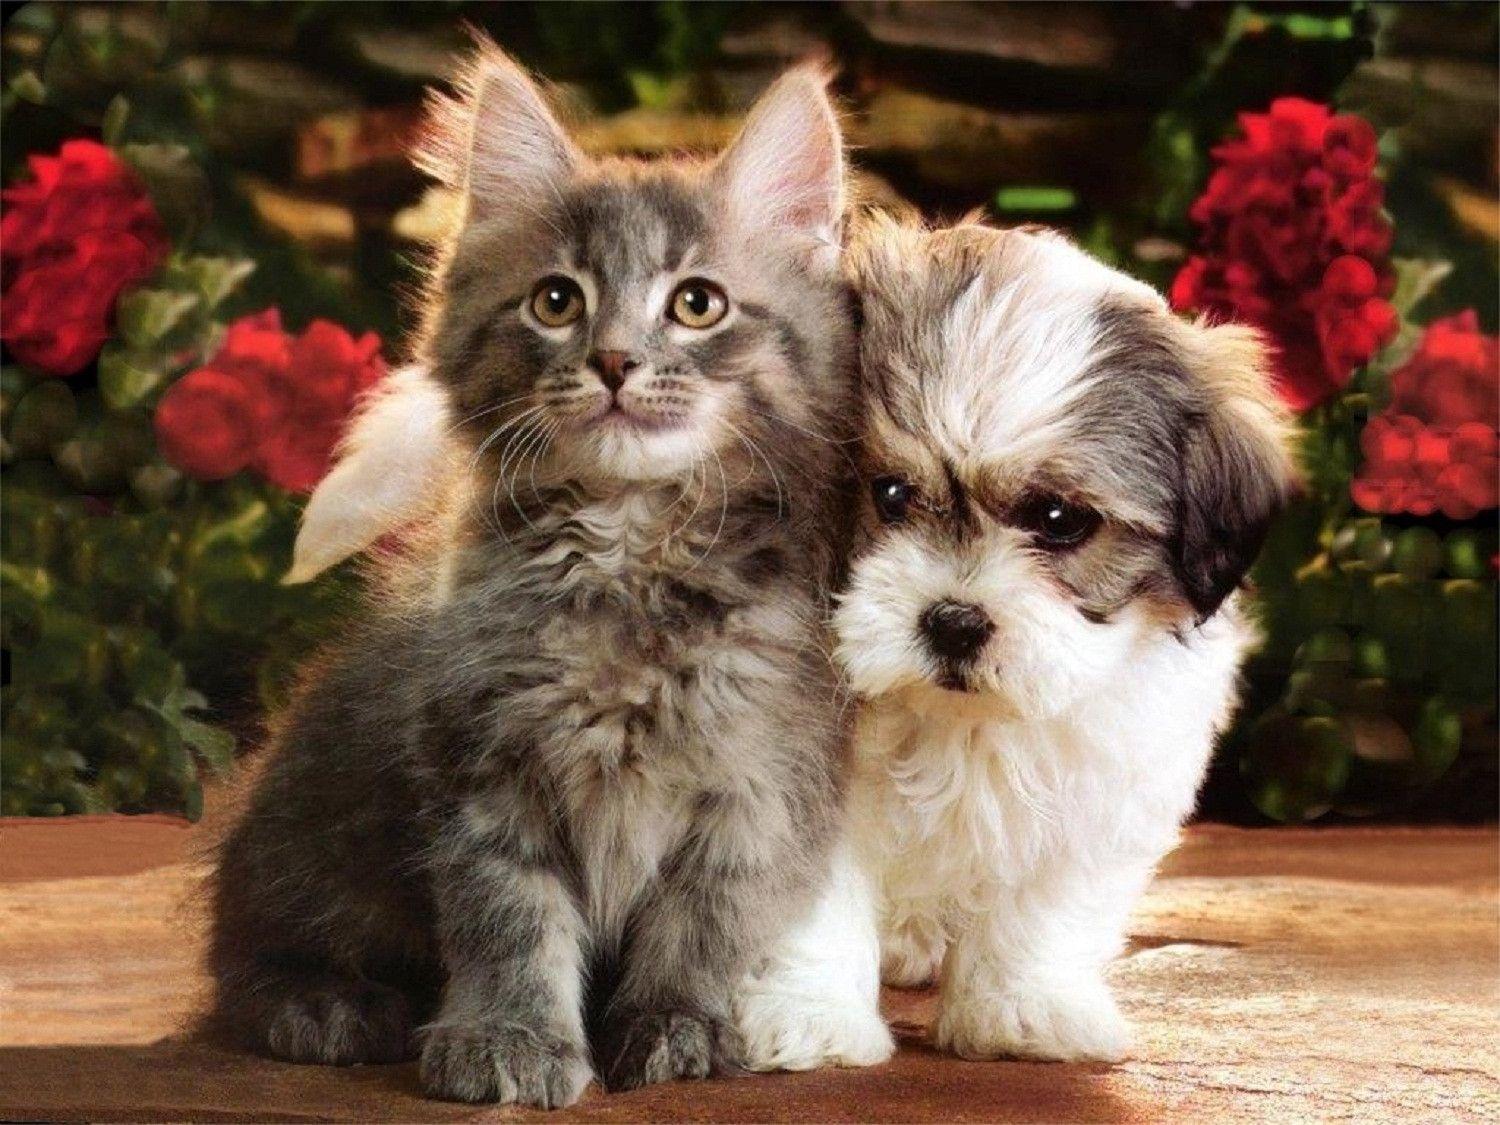 Wallpaper For > Wallpaper Of Puppies And Kittens